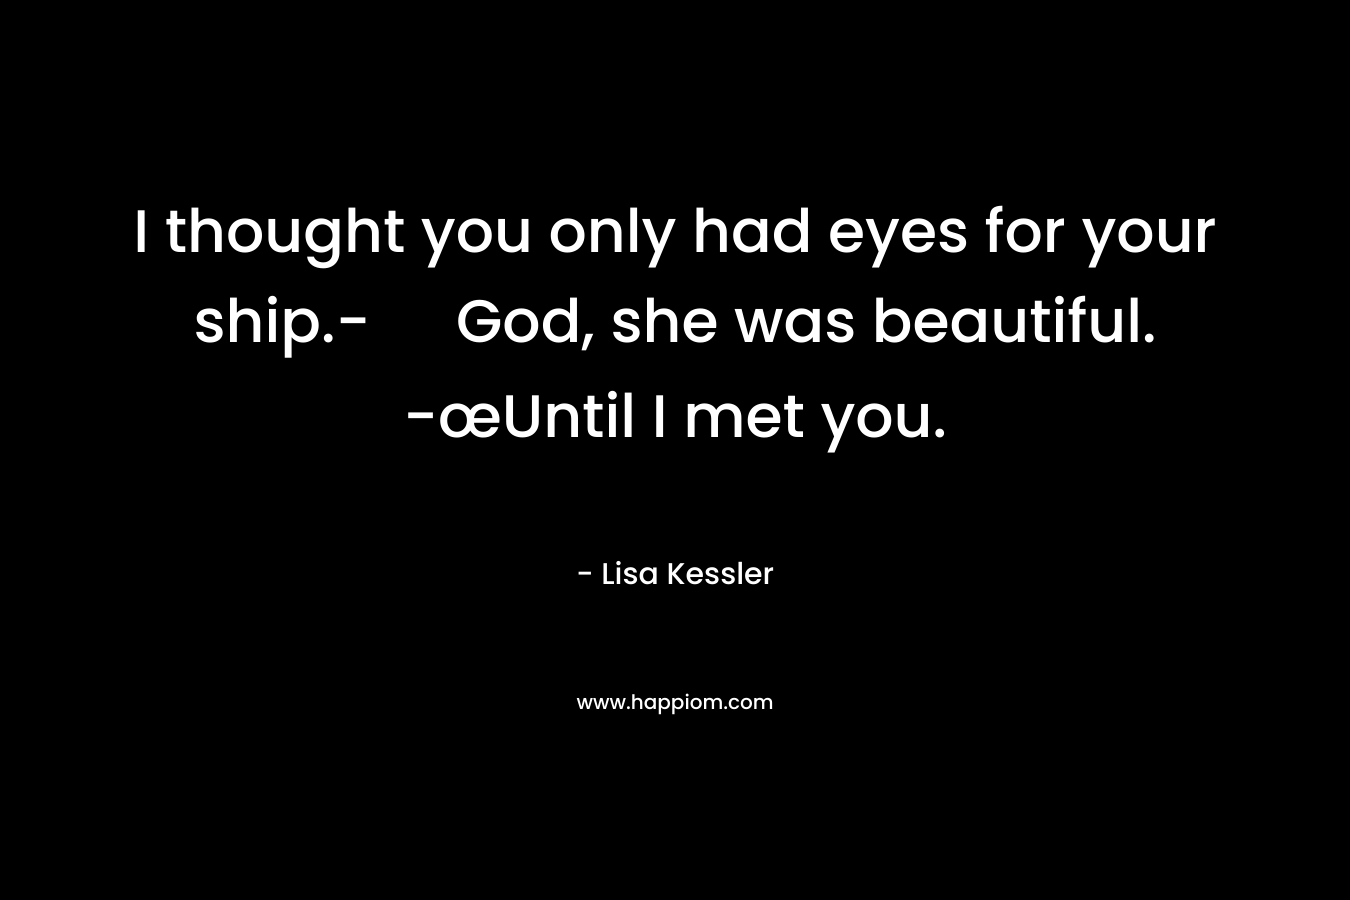 I thought you only had eyes for your ship.-	God, she was beautiful. -œUntil I met you.